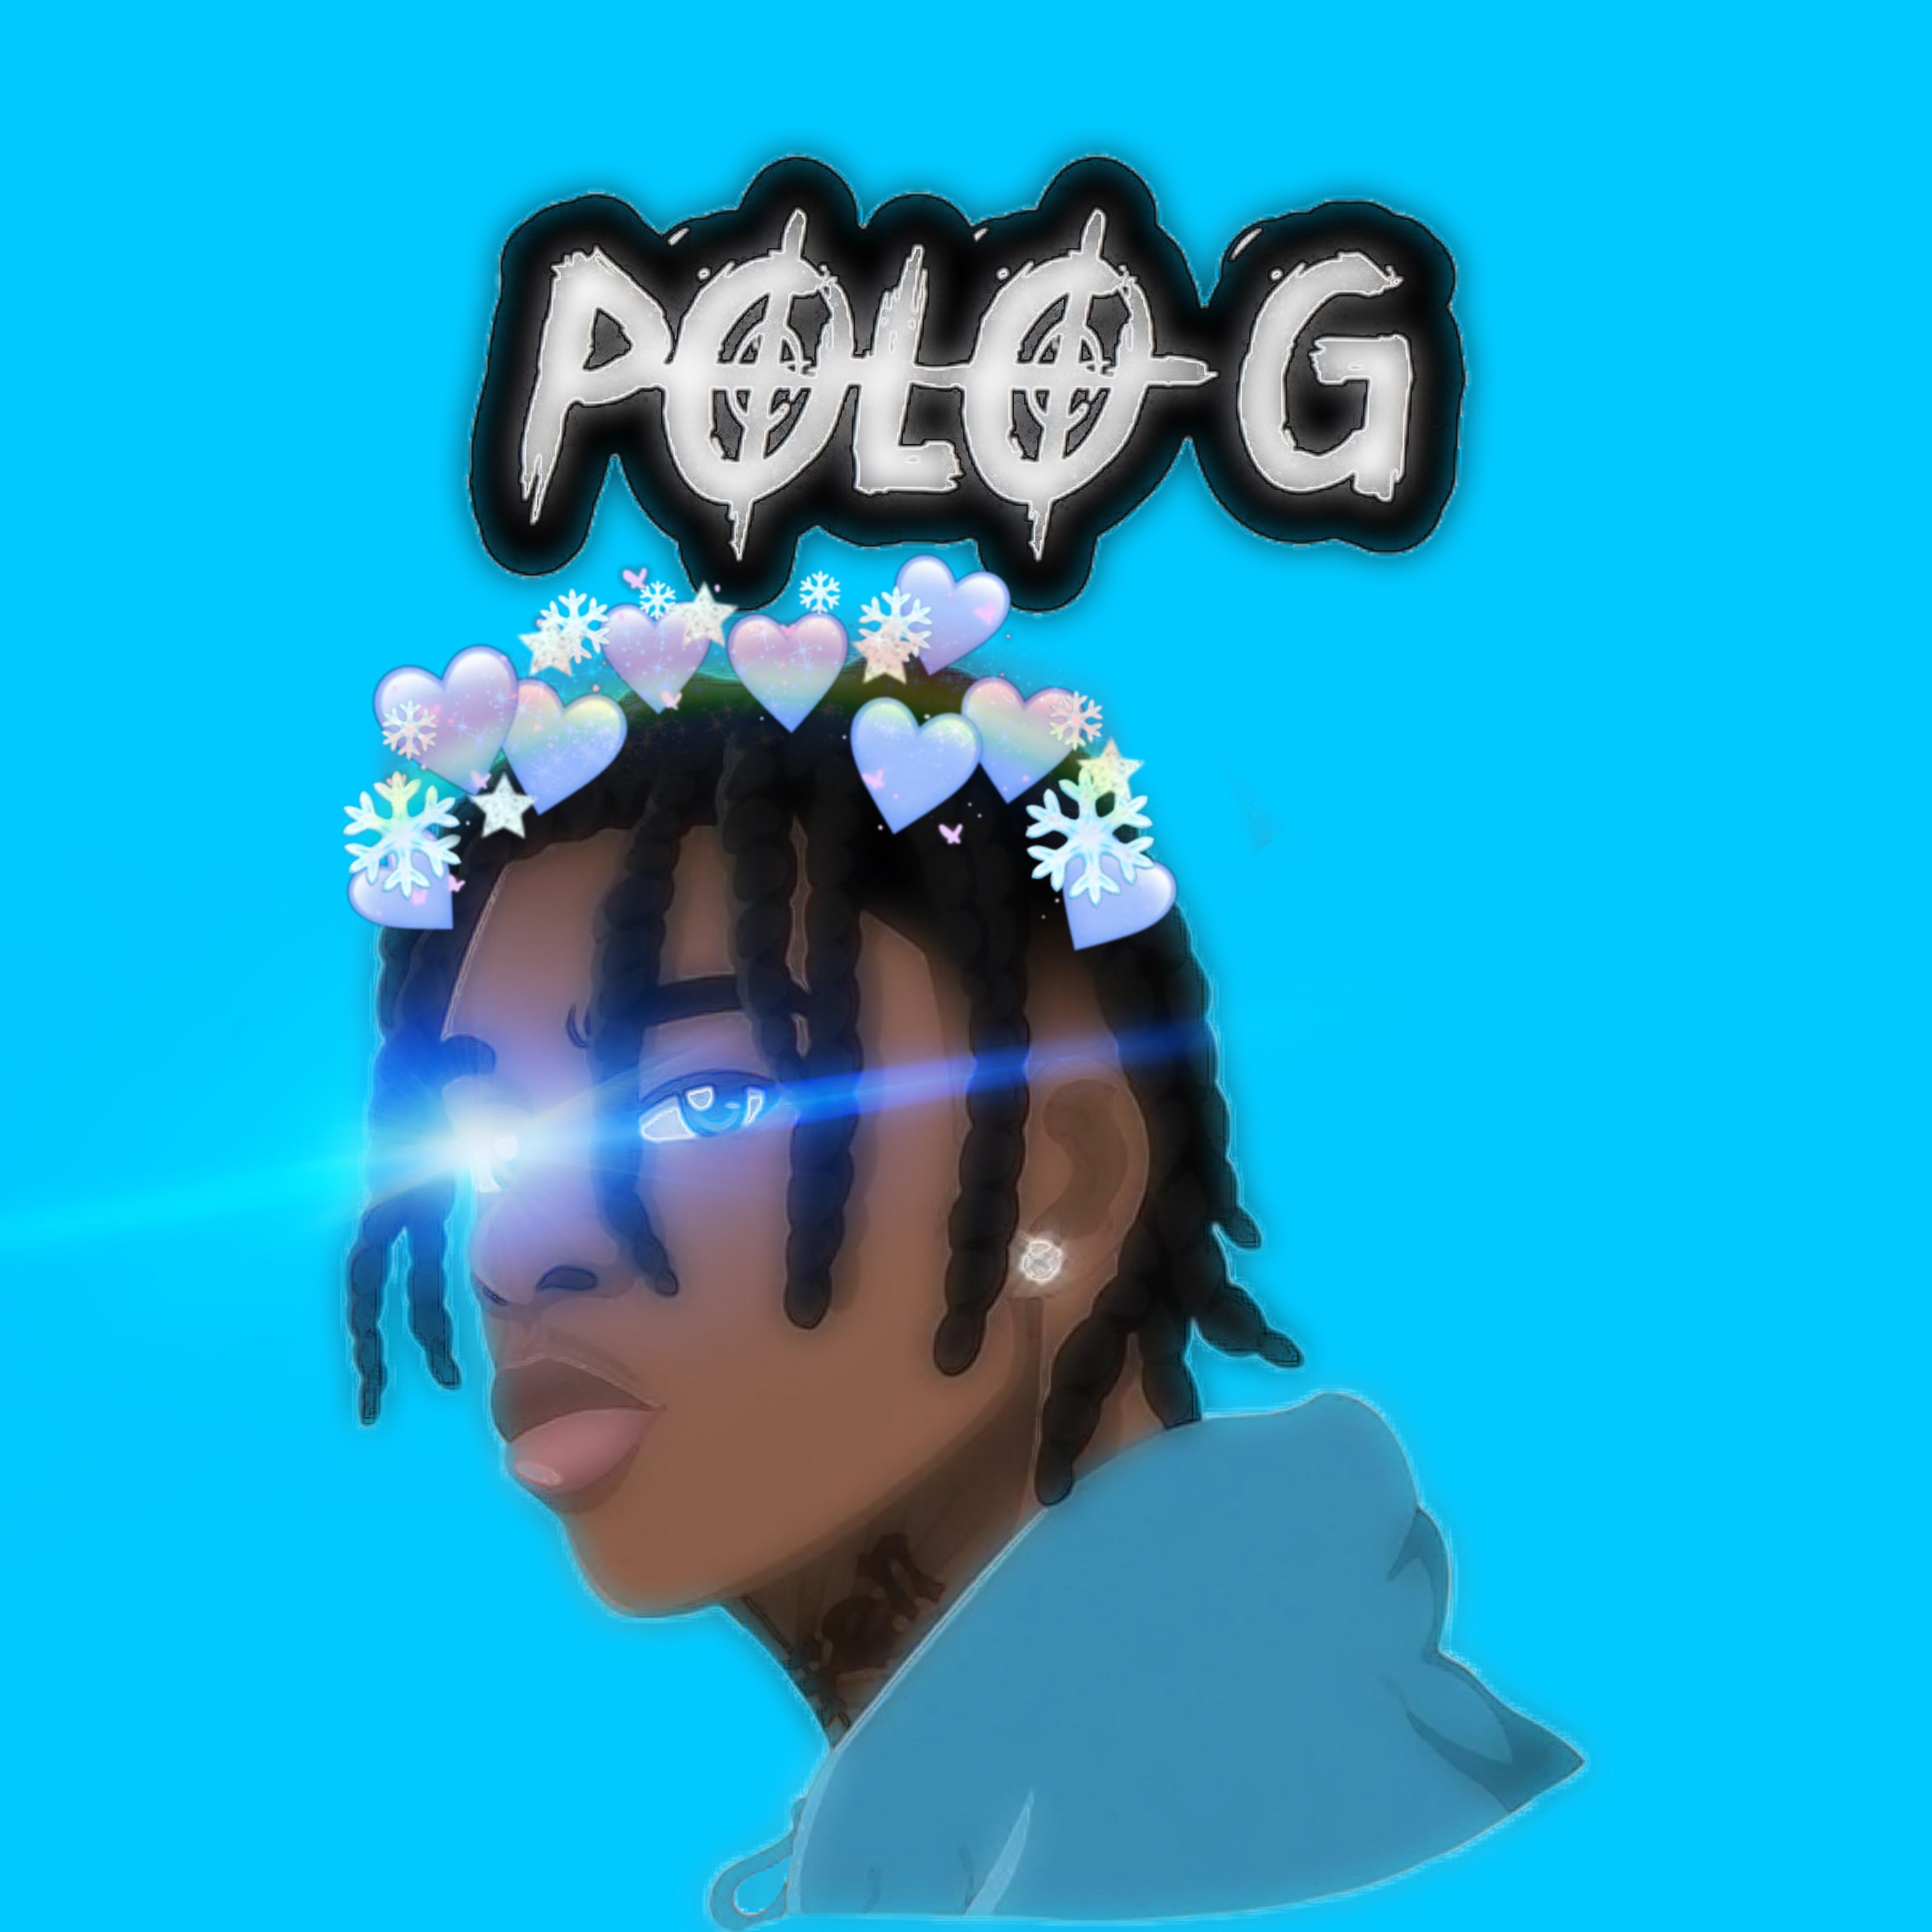 100+] Polo G Cartoon Pictures